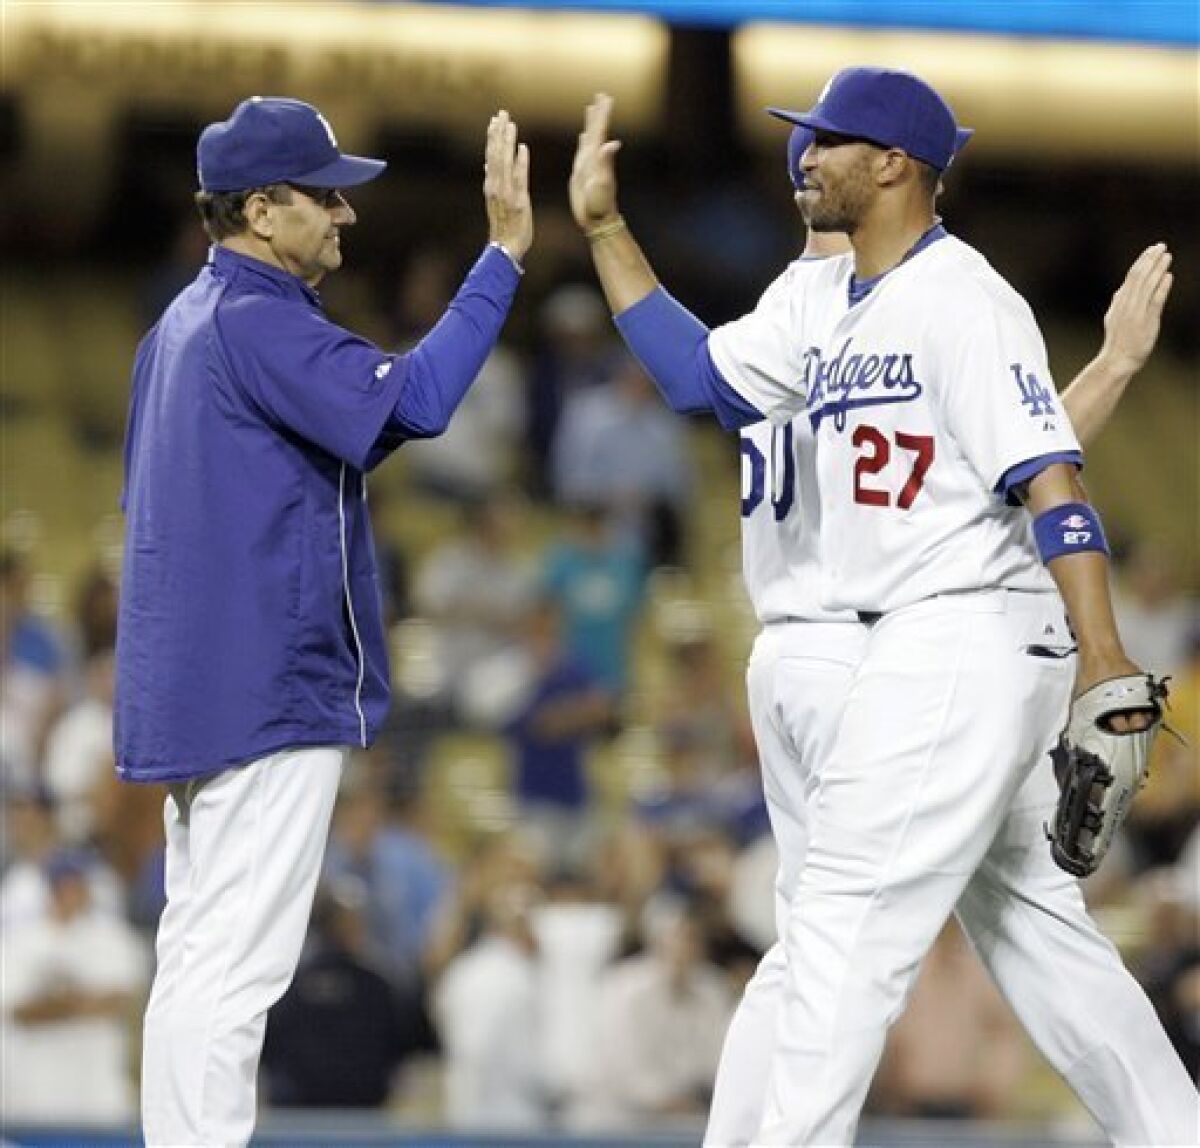 Los Angeles Dodgers manager Joe Torre, left, congratulates Matt Kemp (27) at the end of the game against the Washington Nationals in their record setting thirteenth consecutive home stand win in a baseball game in Los Angeles, Wednesday, May 6, 2009. The Dodgers won 10-3. (AP Photo/Lori Shepler)